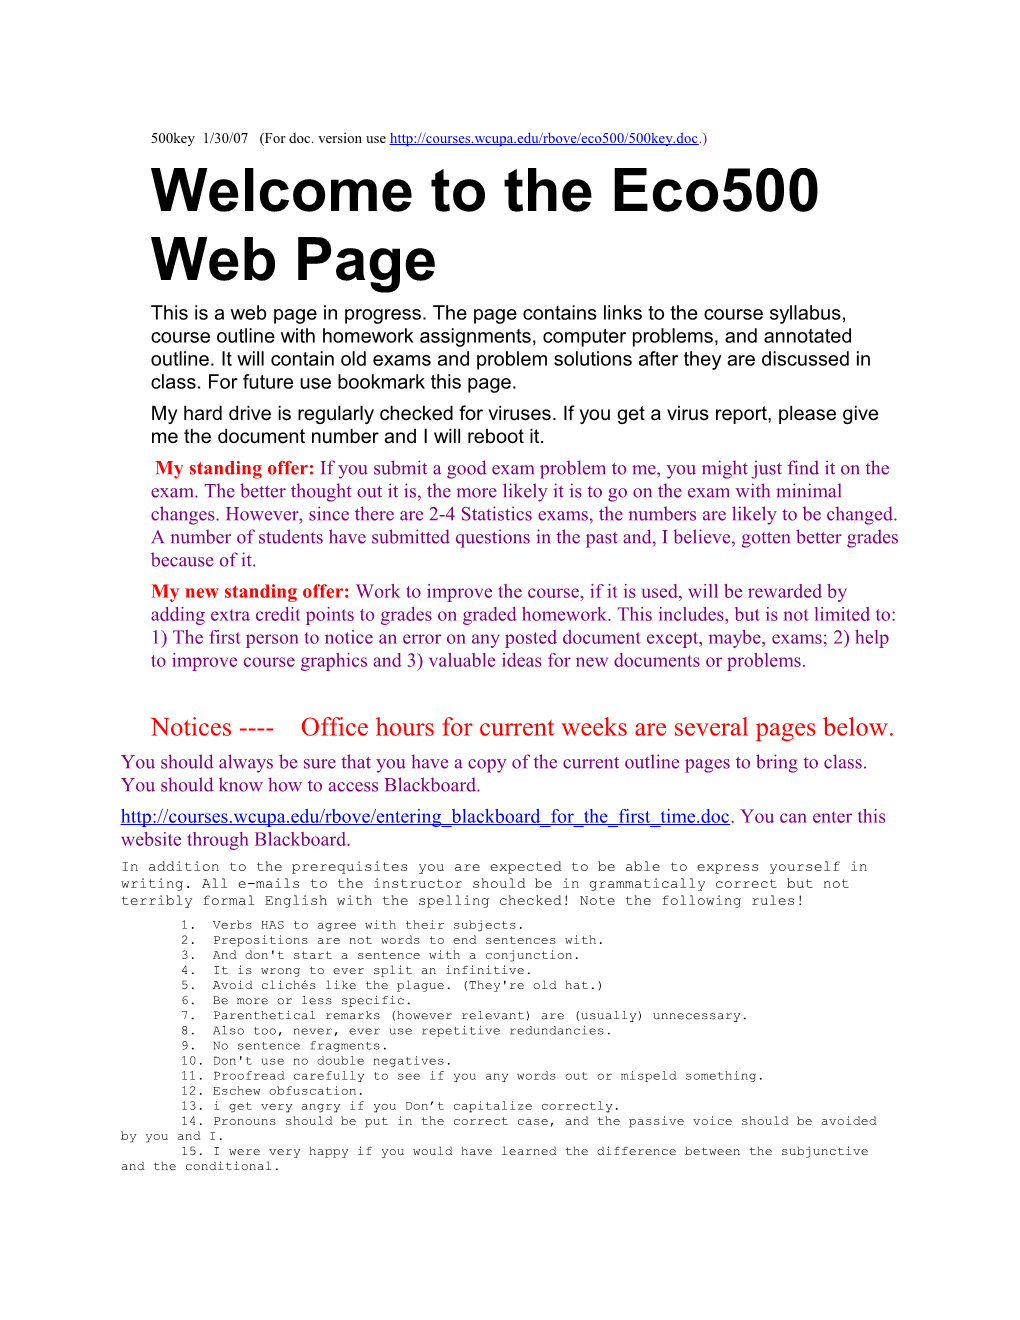 Welcome to the Eco500 Web Page